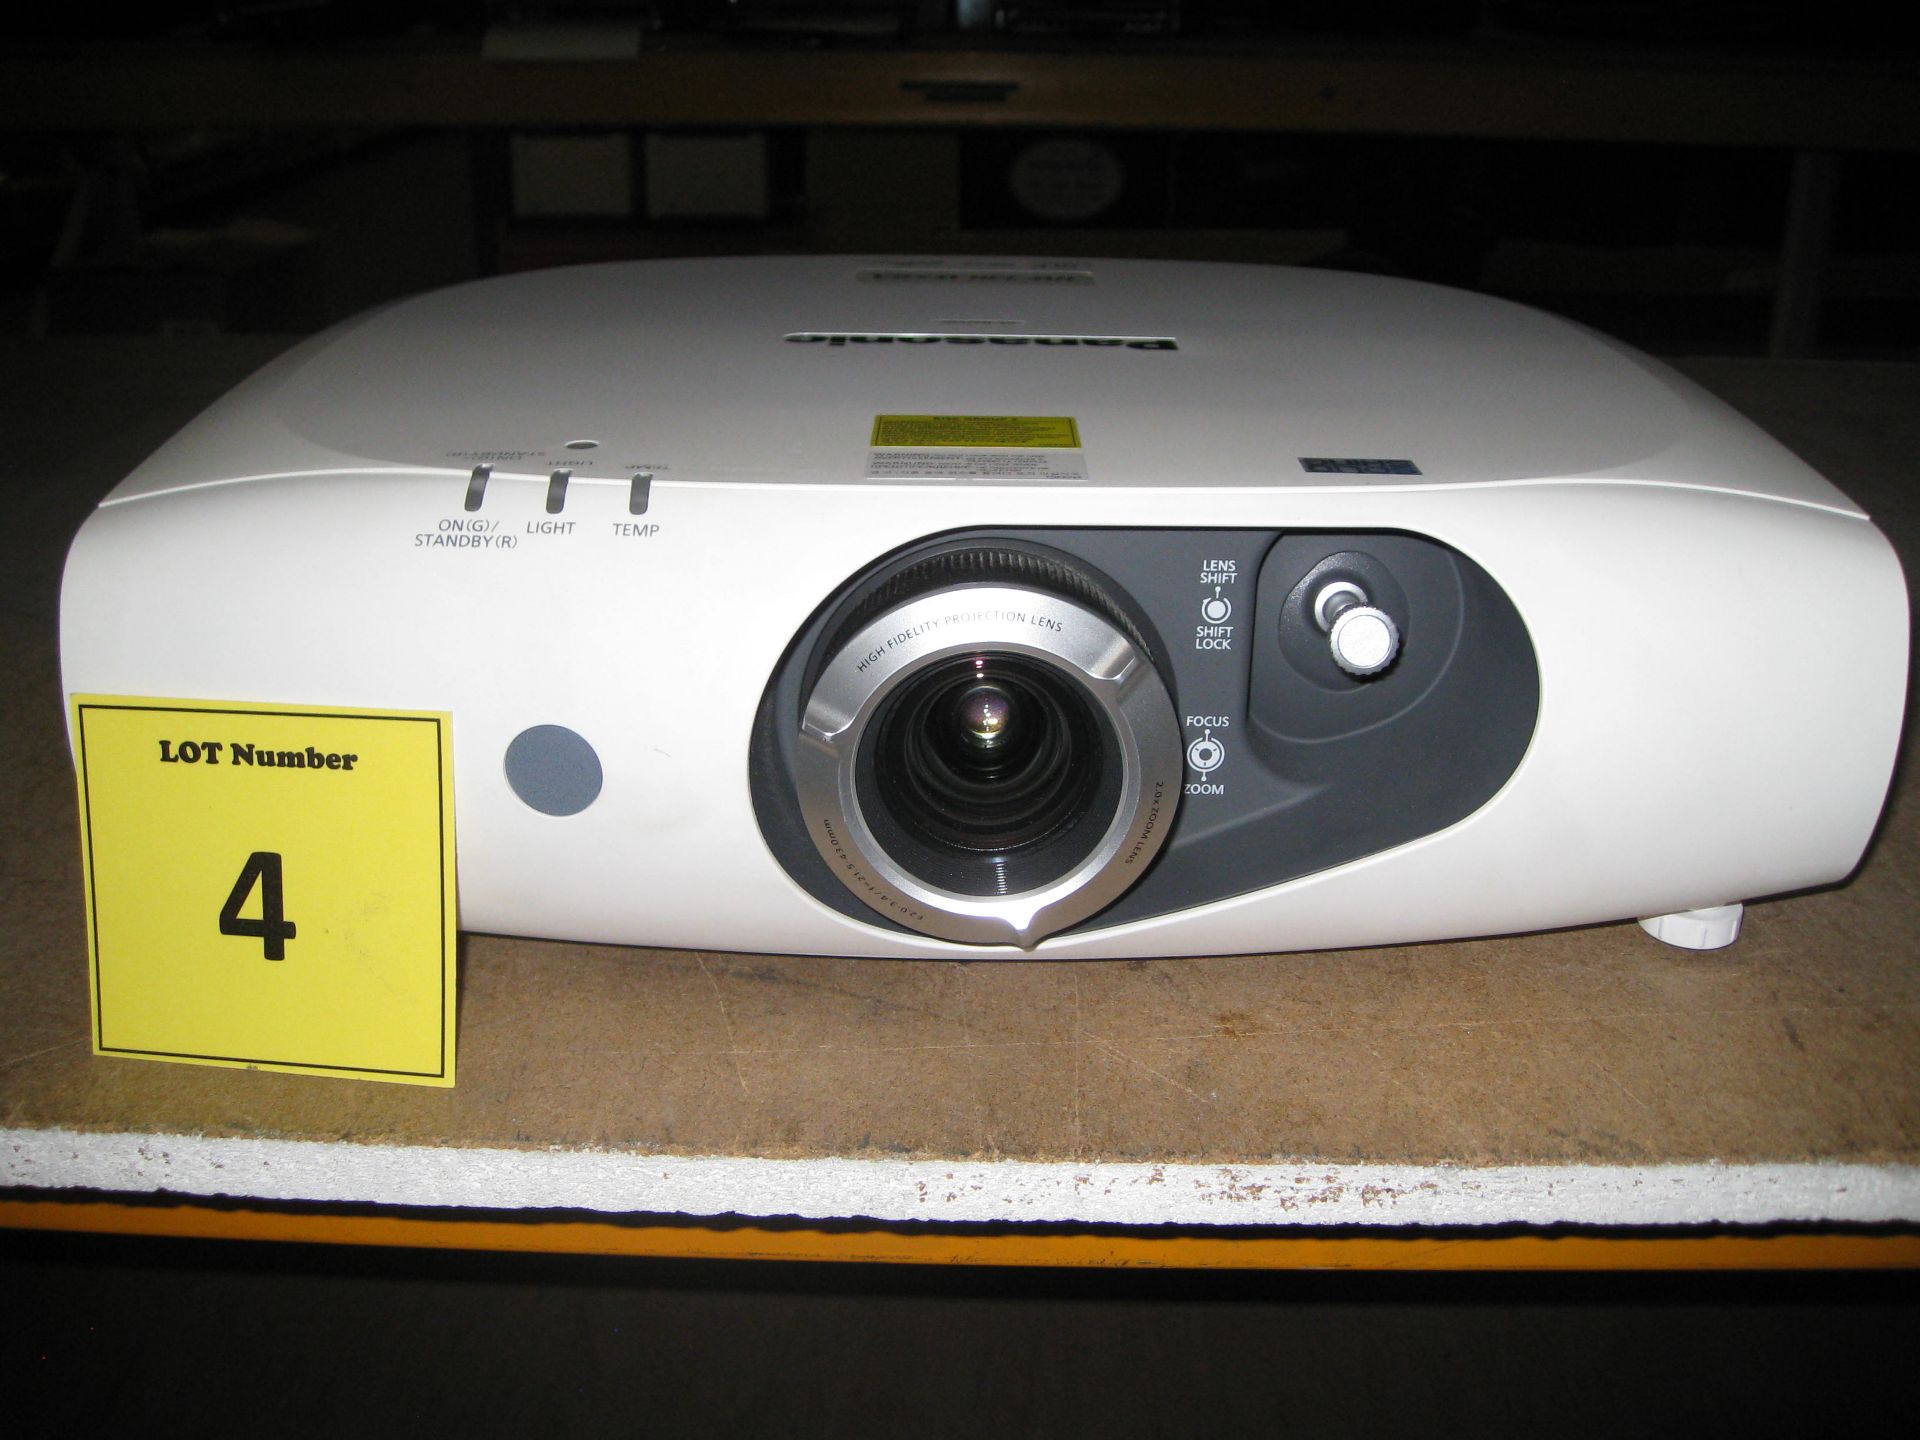 PANASONIC DLP PROJECTOR. MODEL PT-RW330EA. WITH HDMI. RUNTIME 13144